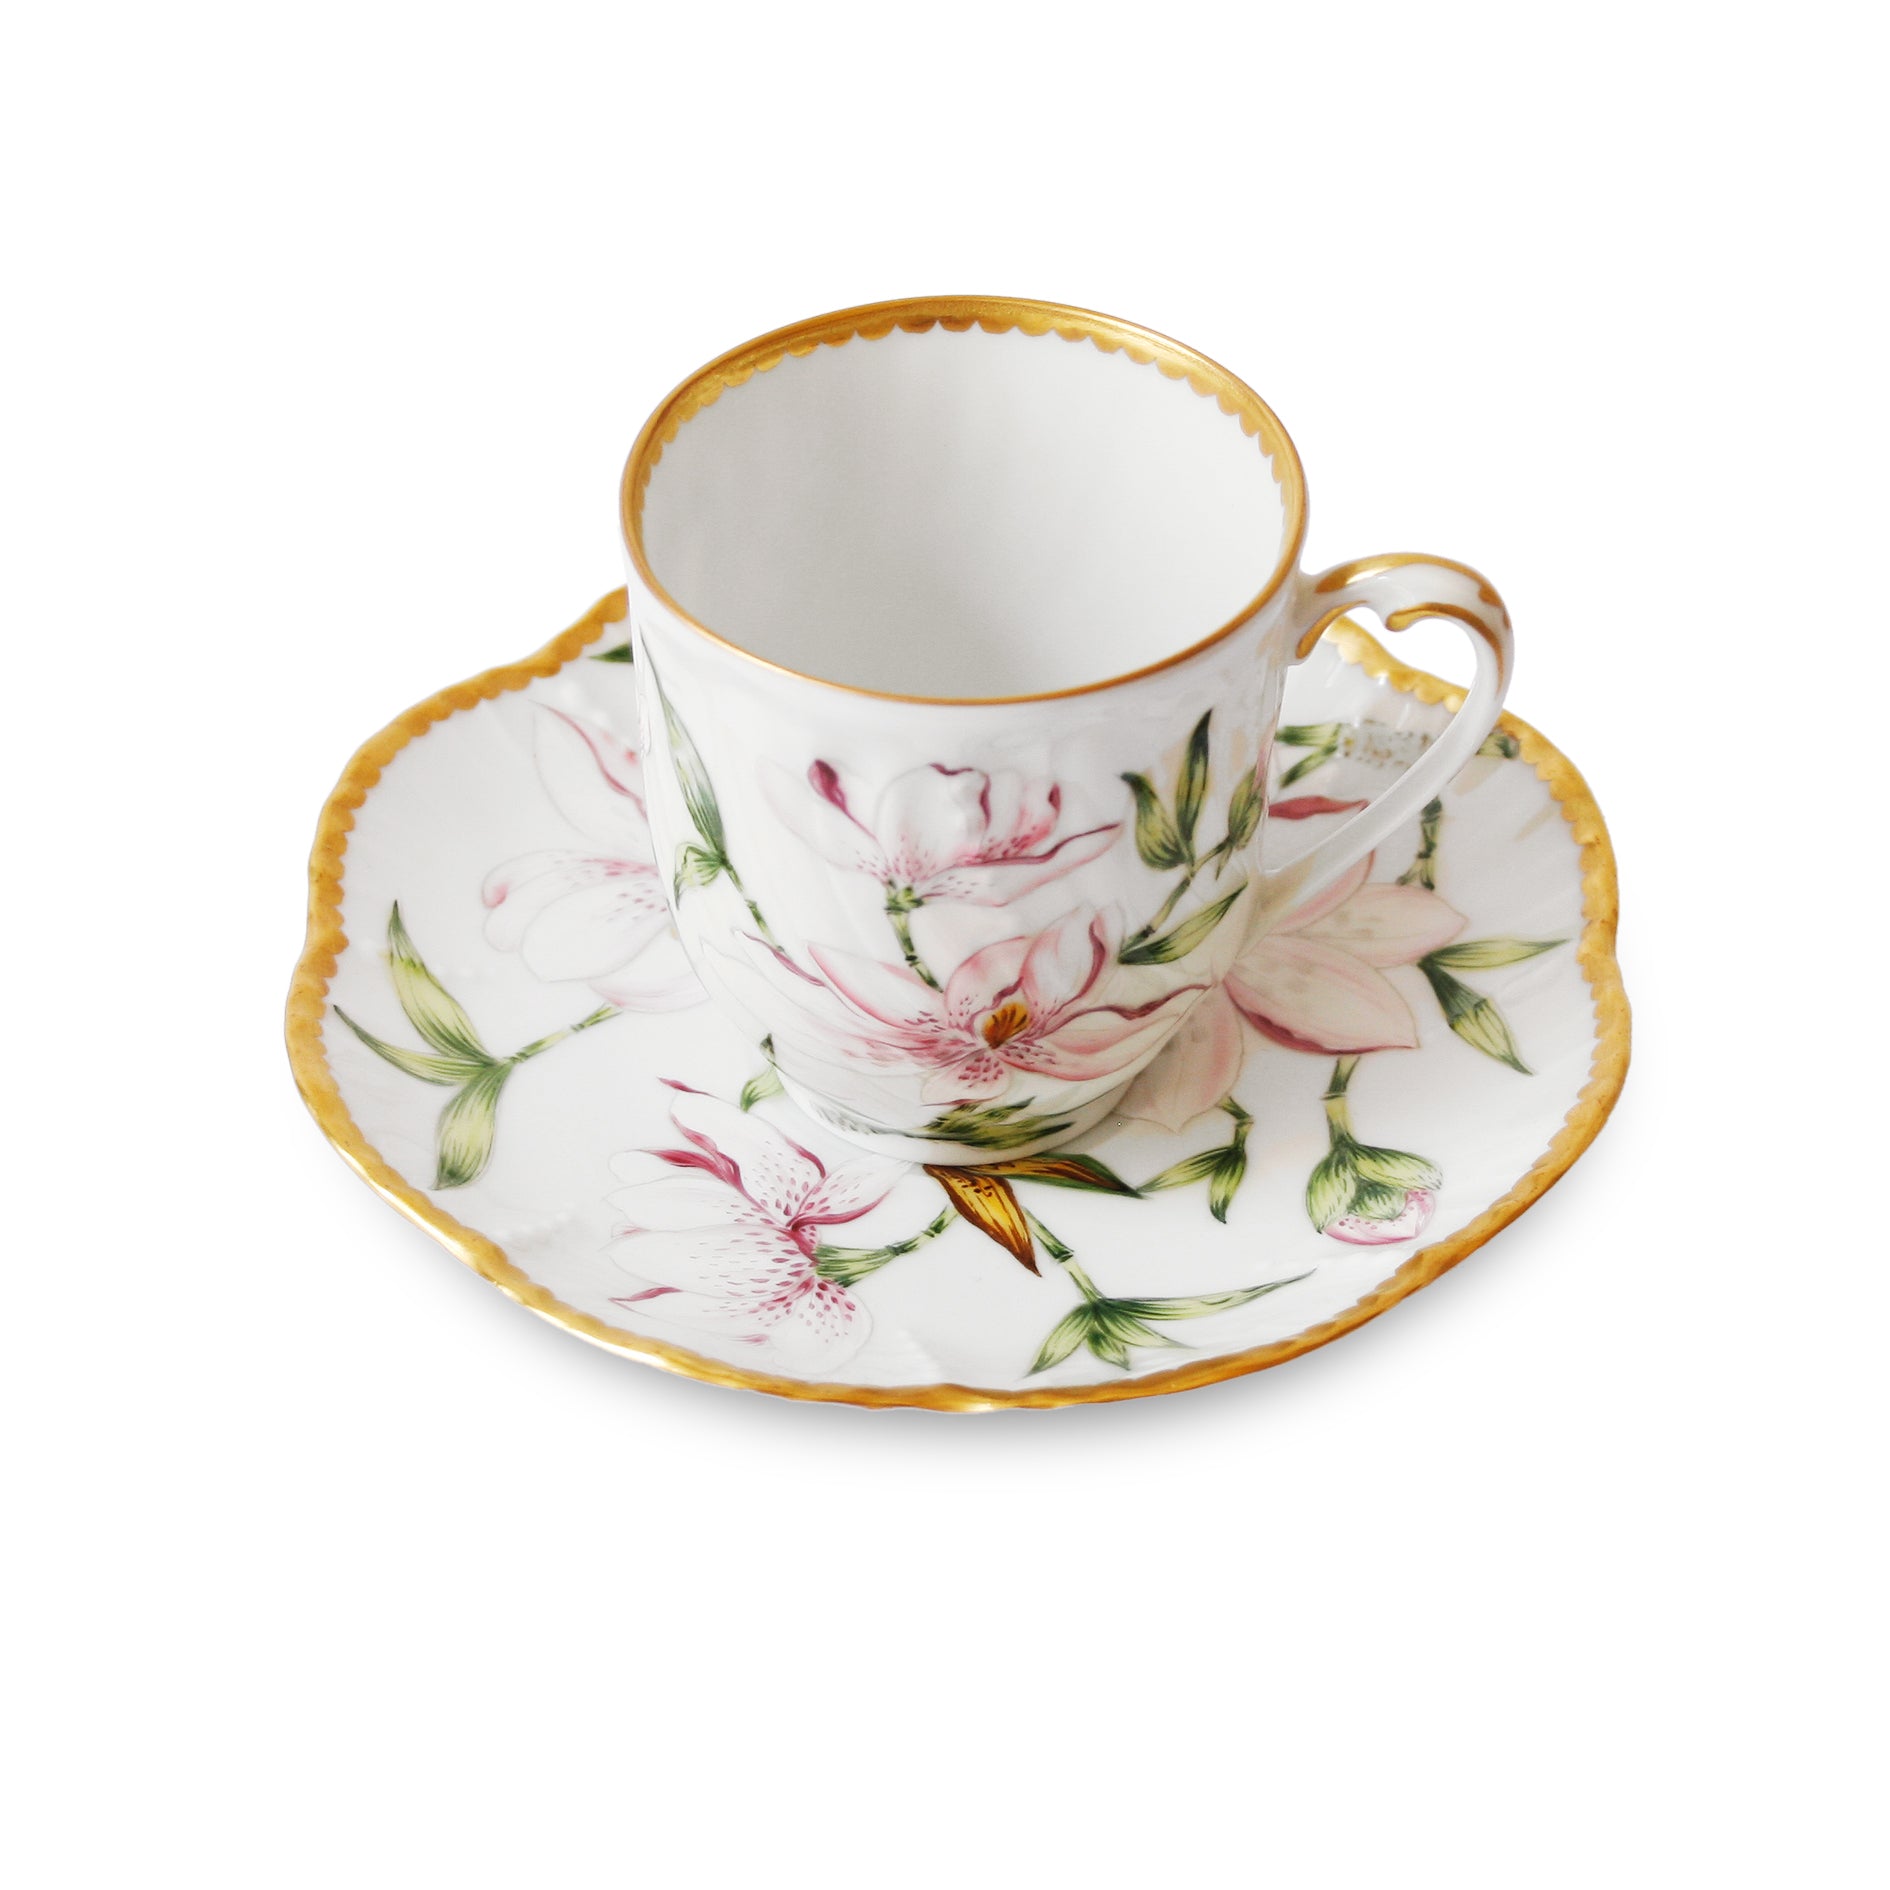 Magnolia - Coffee cup and saucer
